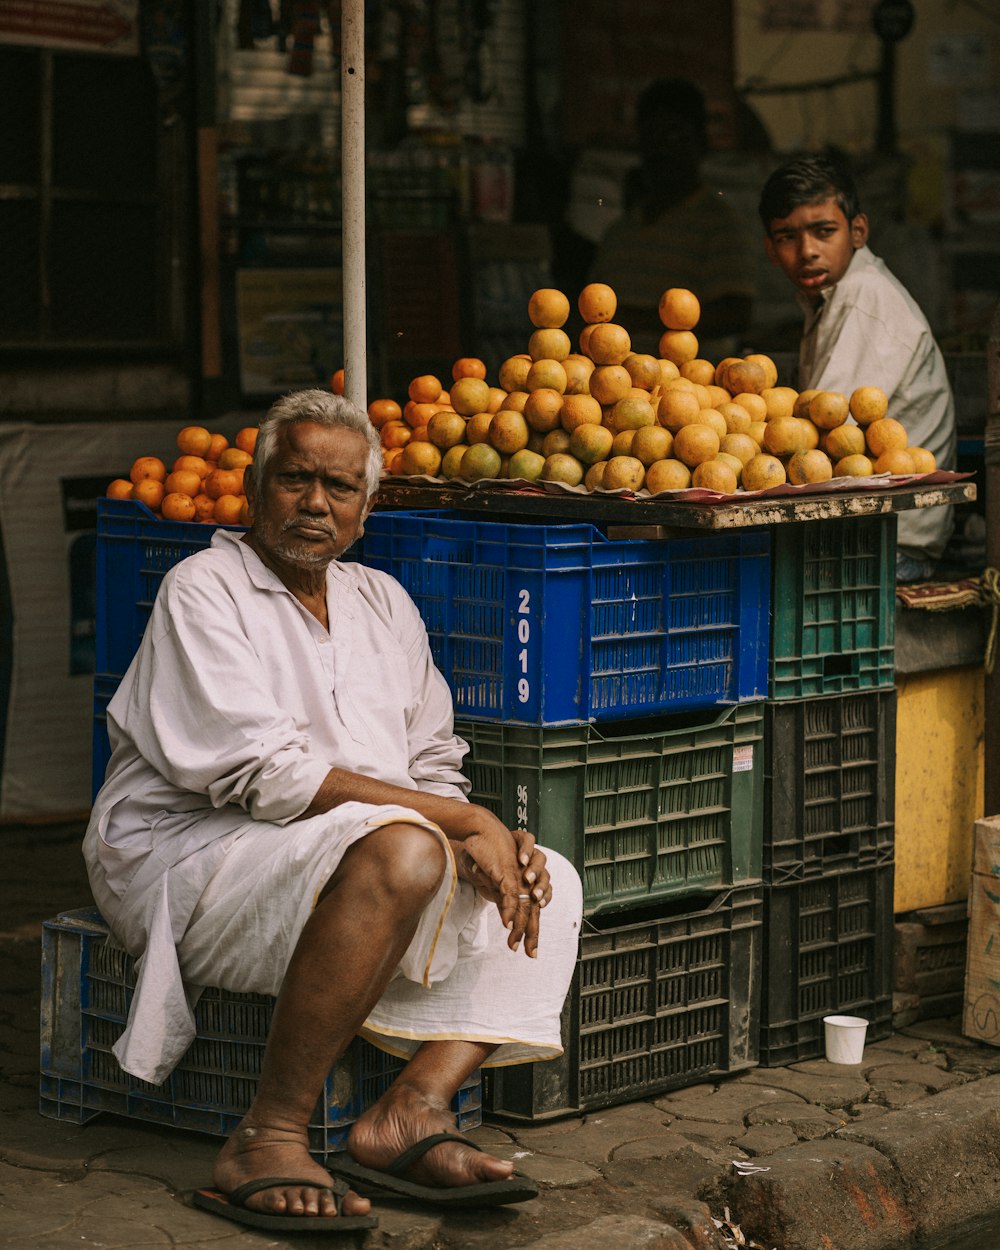 a man sitting in front of a pile of oranges